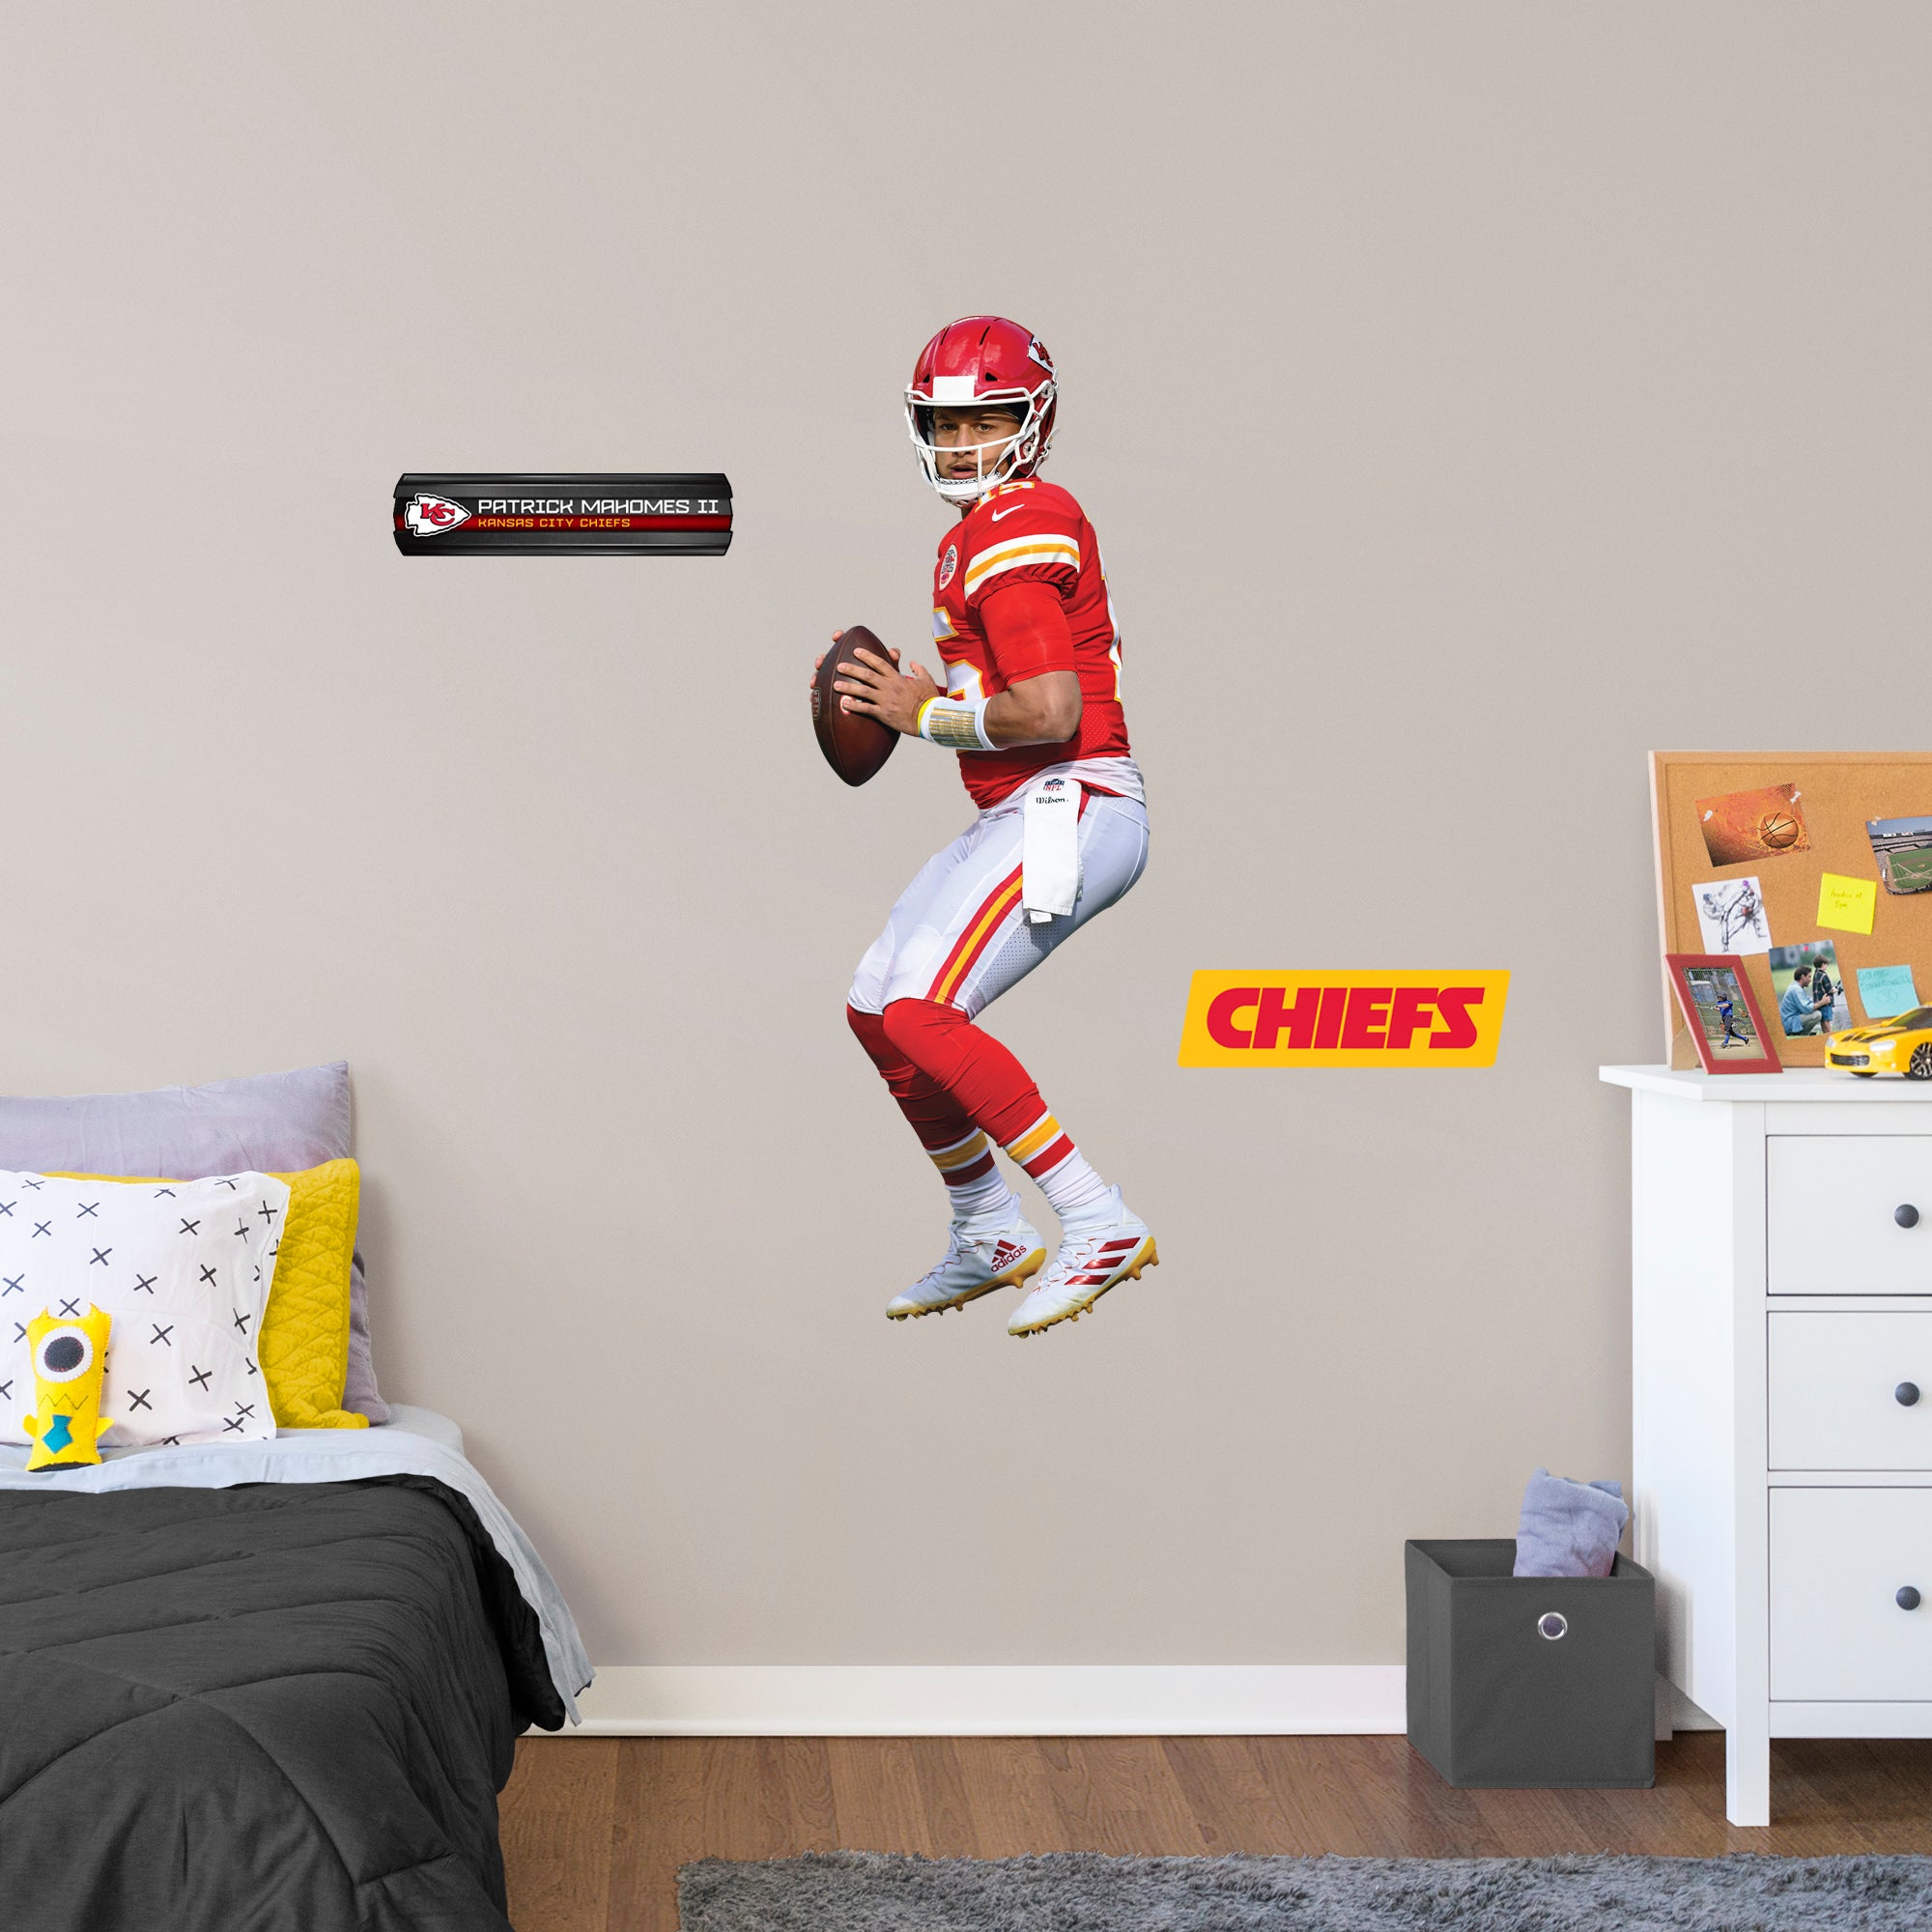 Patrick Mahomes II 2020 Pocket - Officially Licensed NFL Removable Wall Decal Giant Athlete + 2 Decals (17"W x 51"H) by Fathead